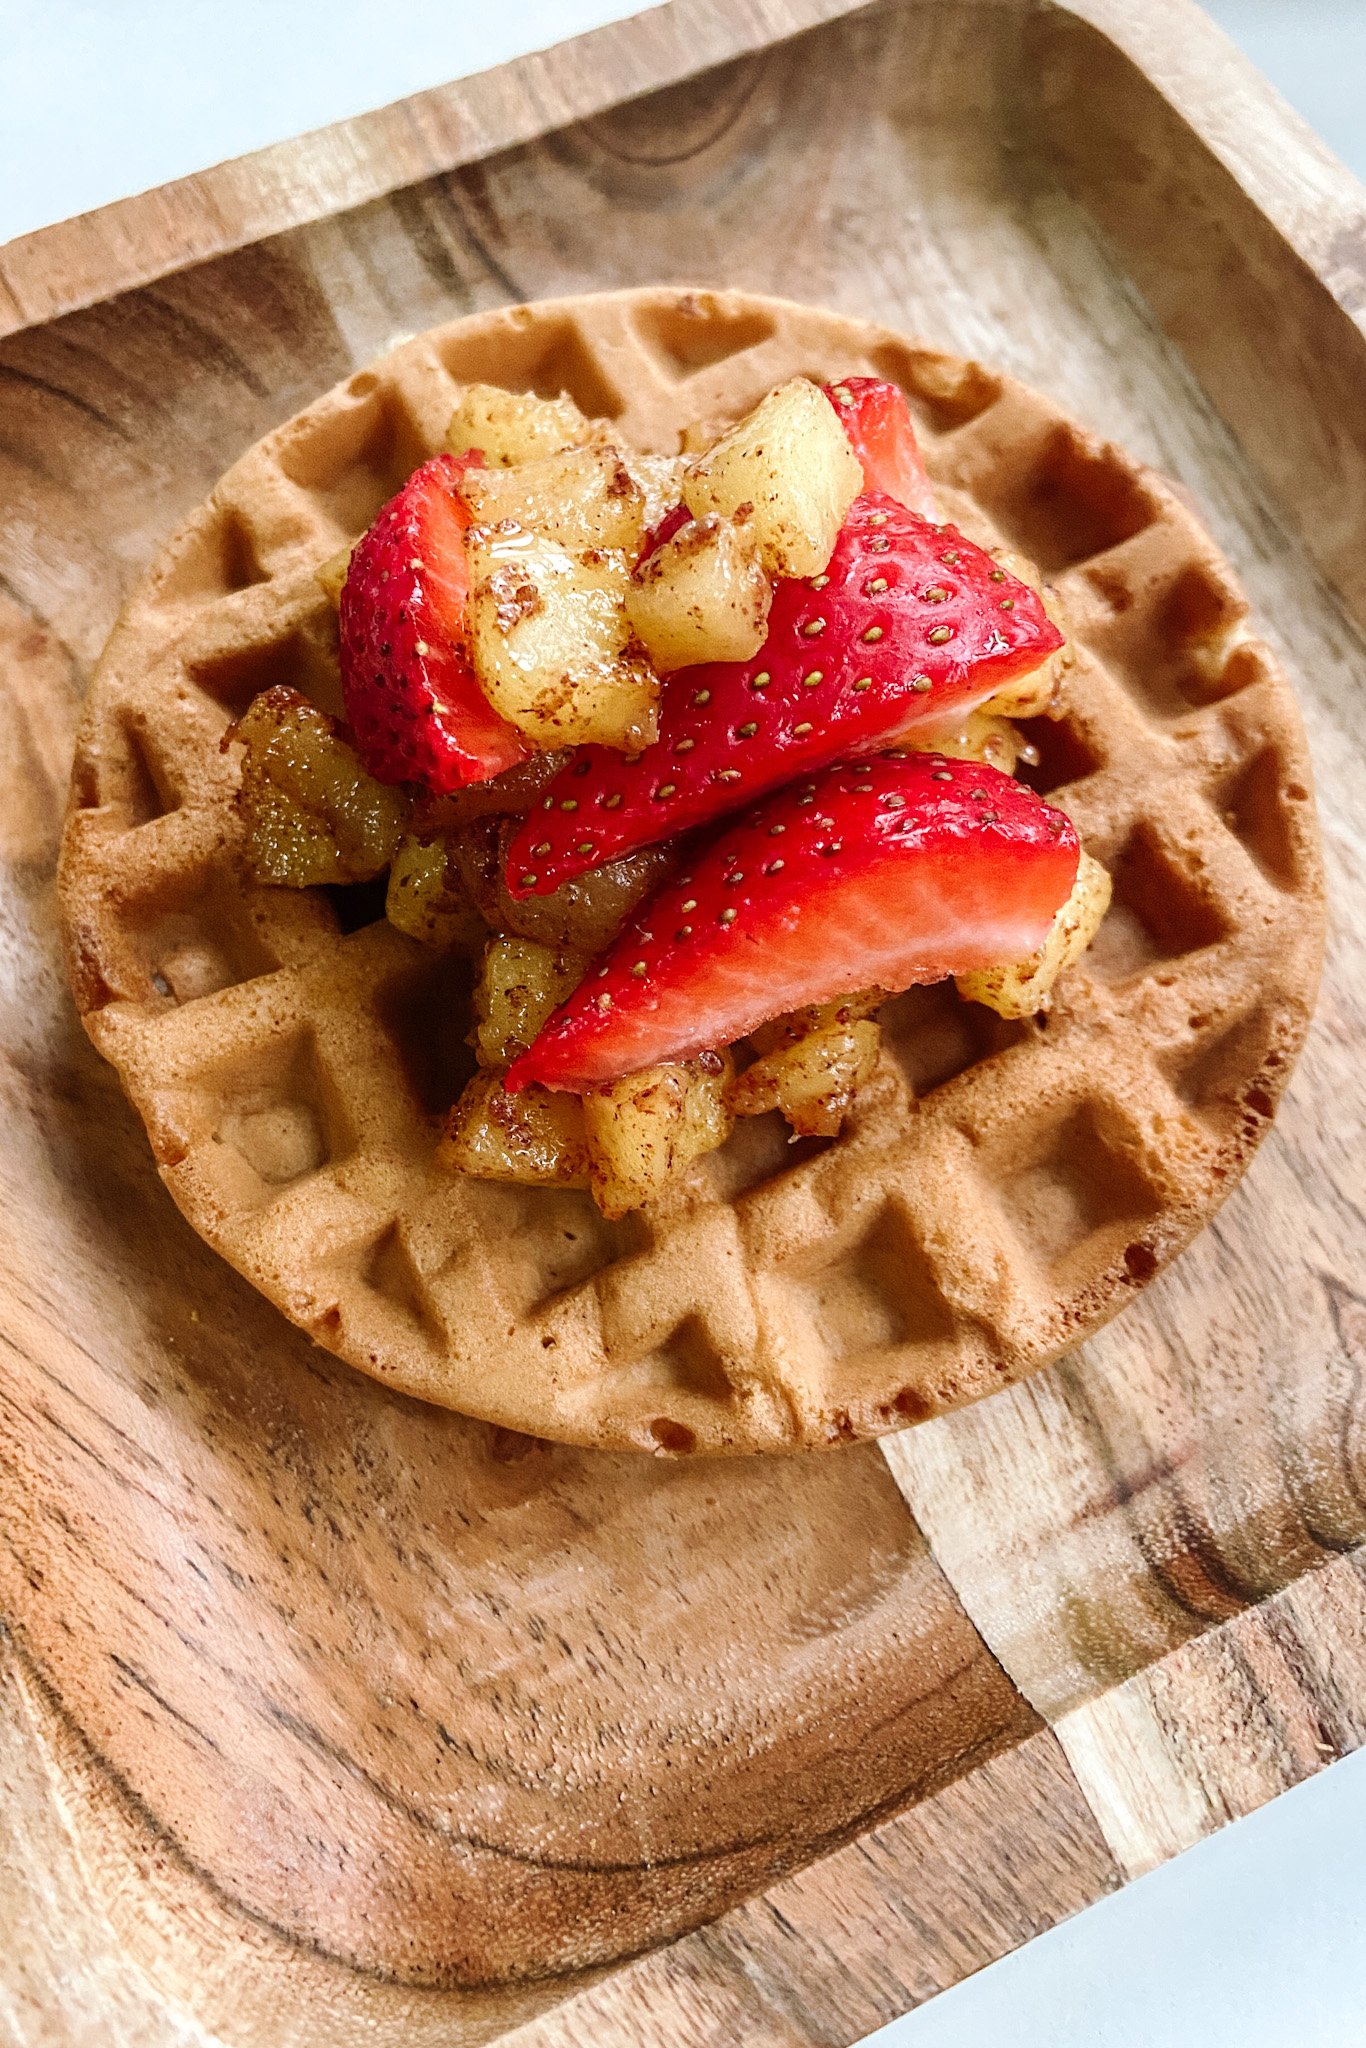 Cinnamon apple waffles topped with cinnamon apples and sliced strawberries